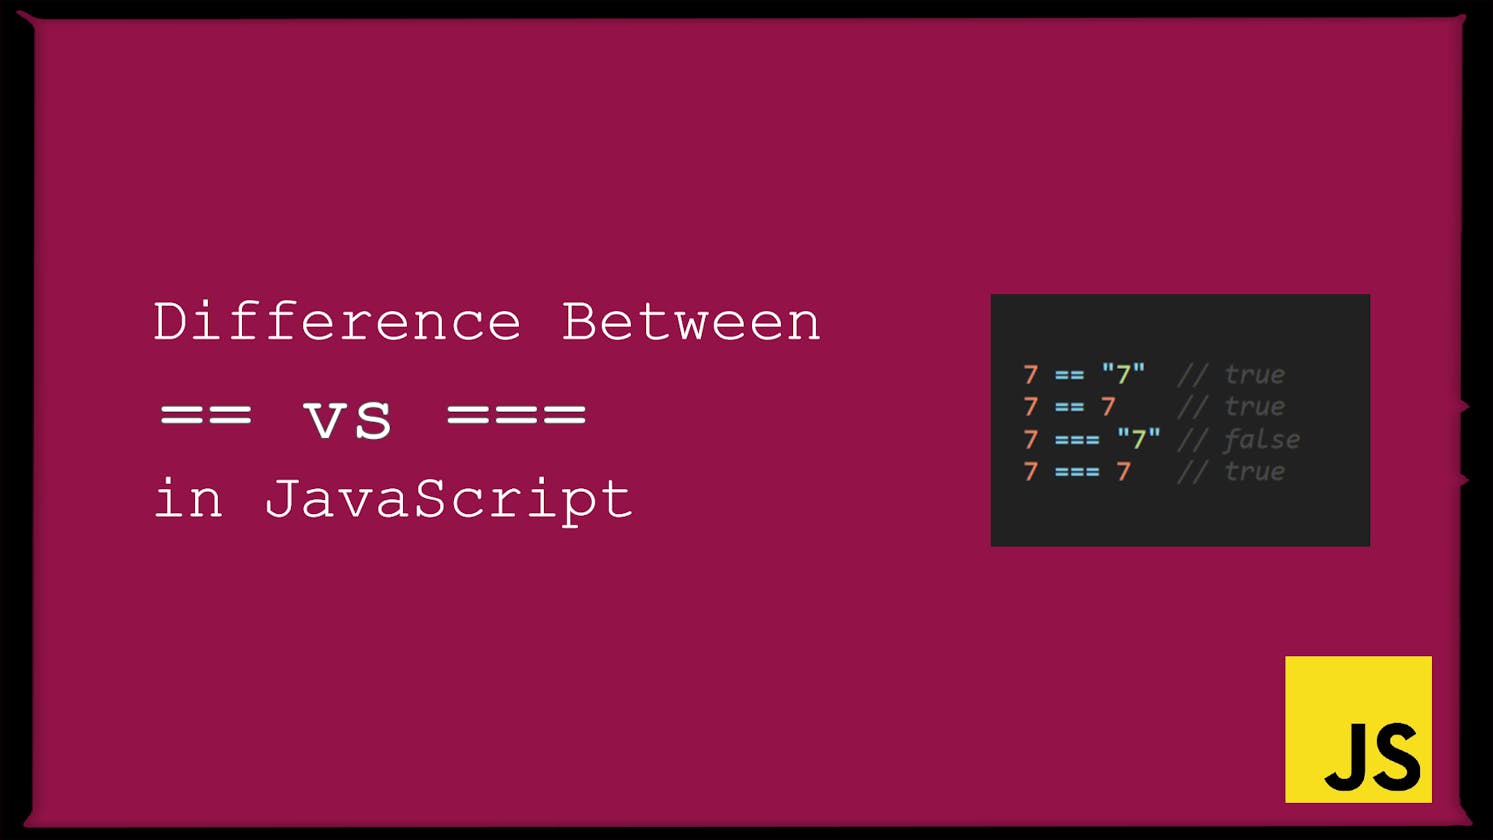 Difference Between "==" and "===" in javaScript